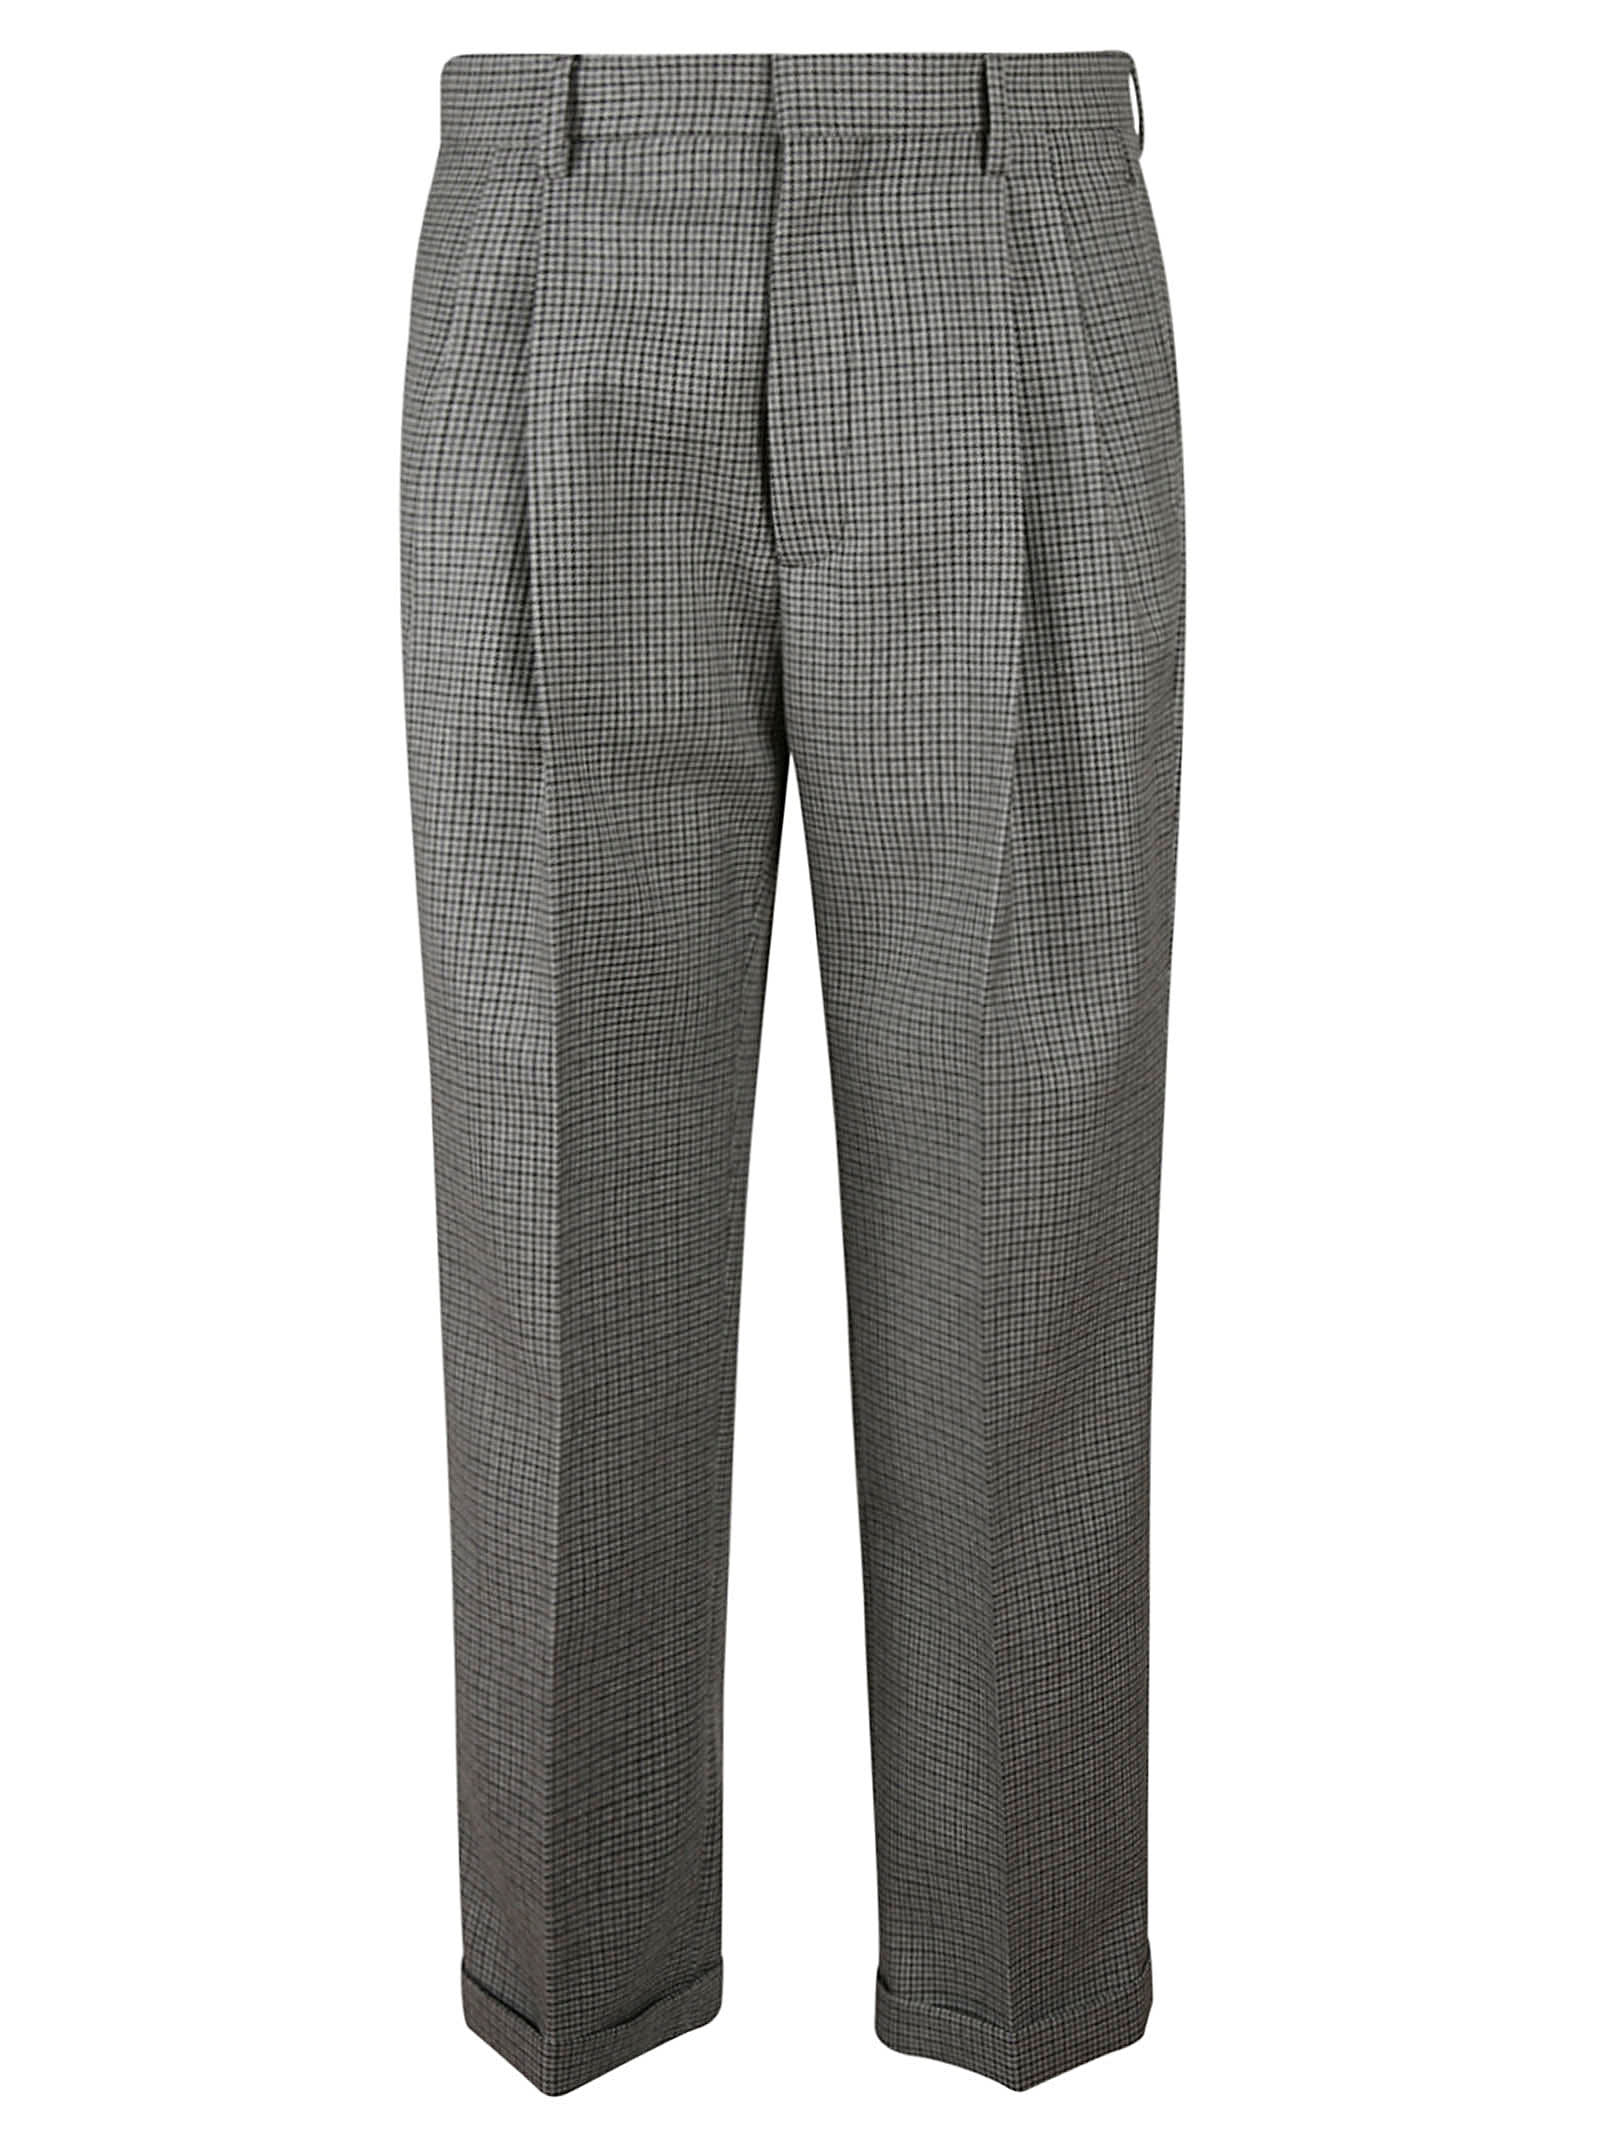 Marni Straight Leg Houndstooth Trousers